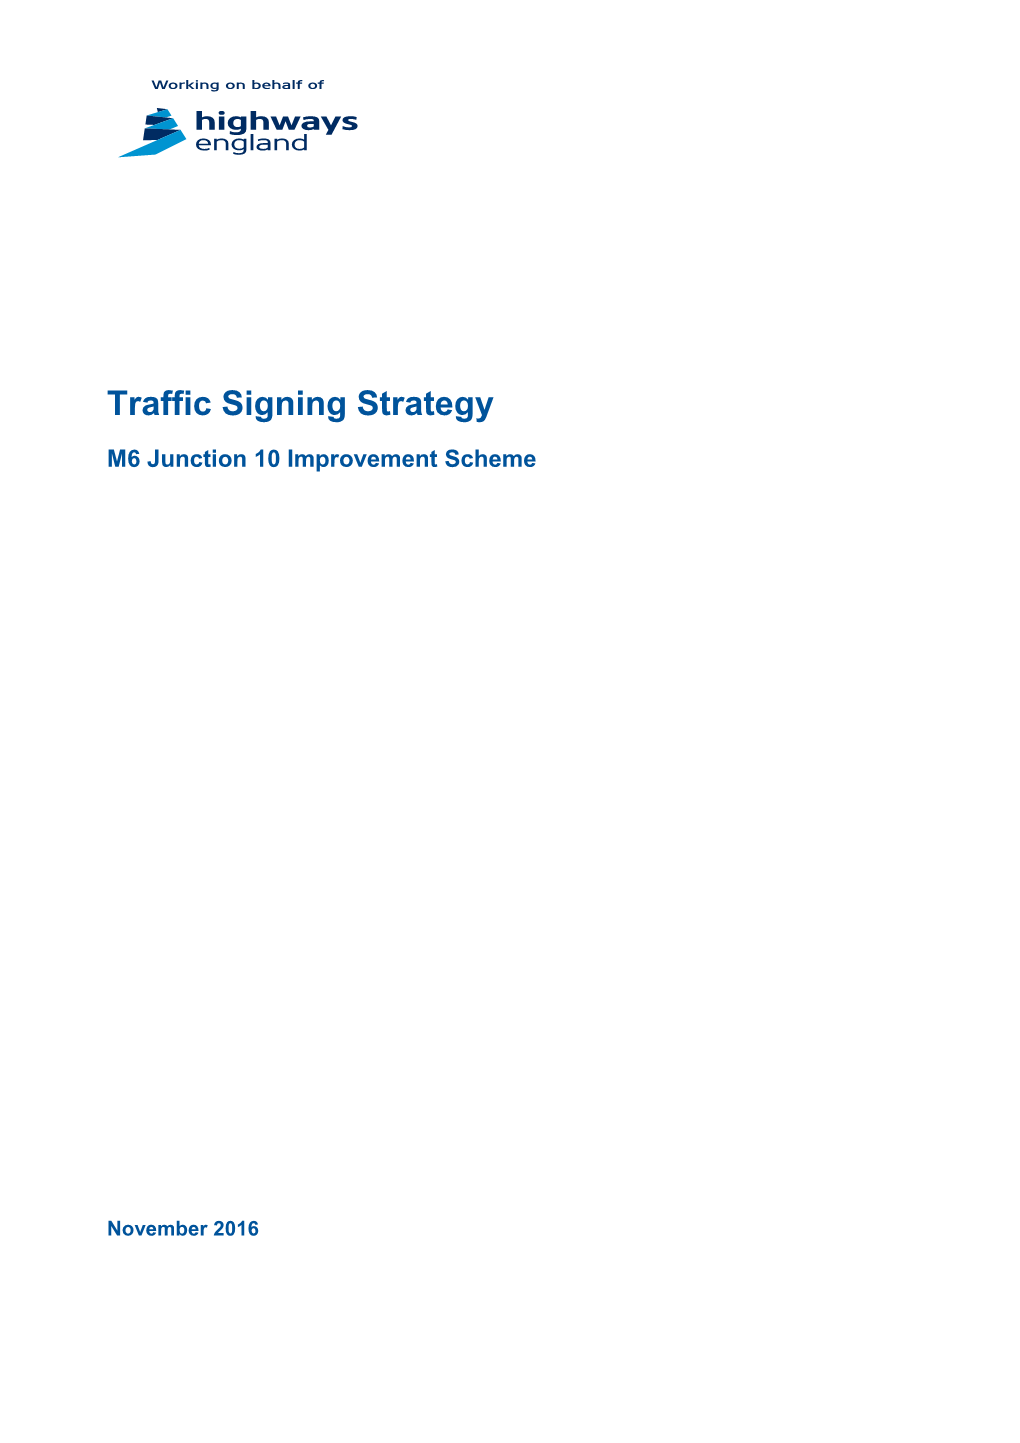 Traffic Signing Strategy